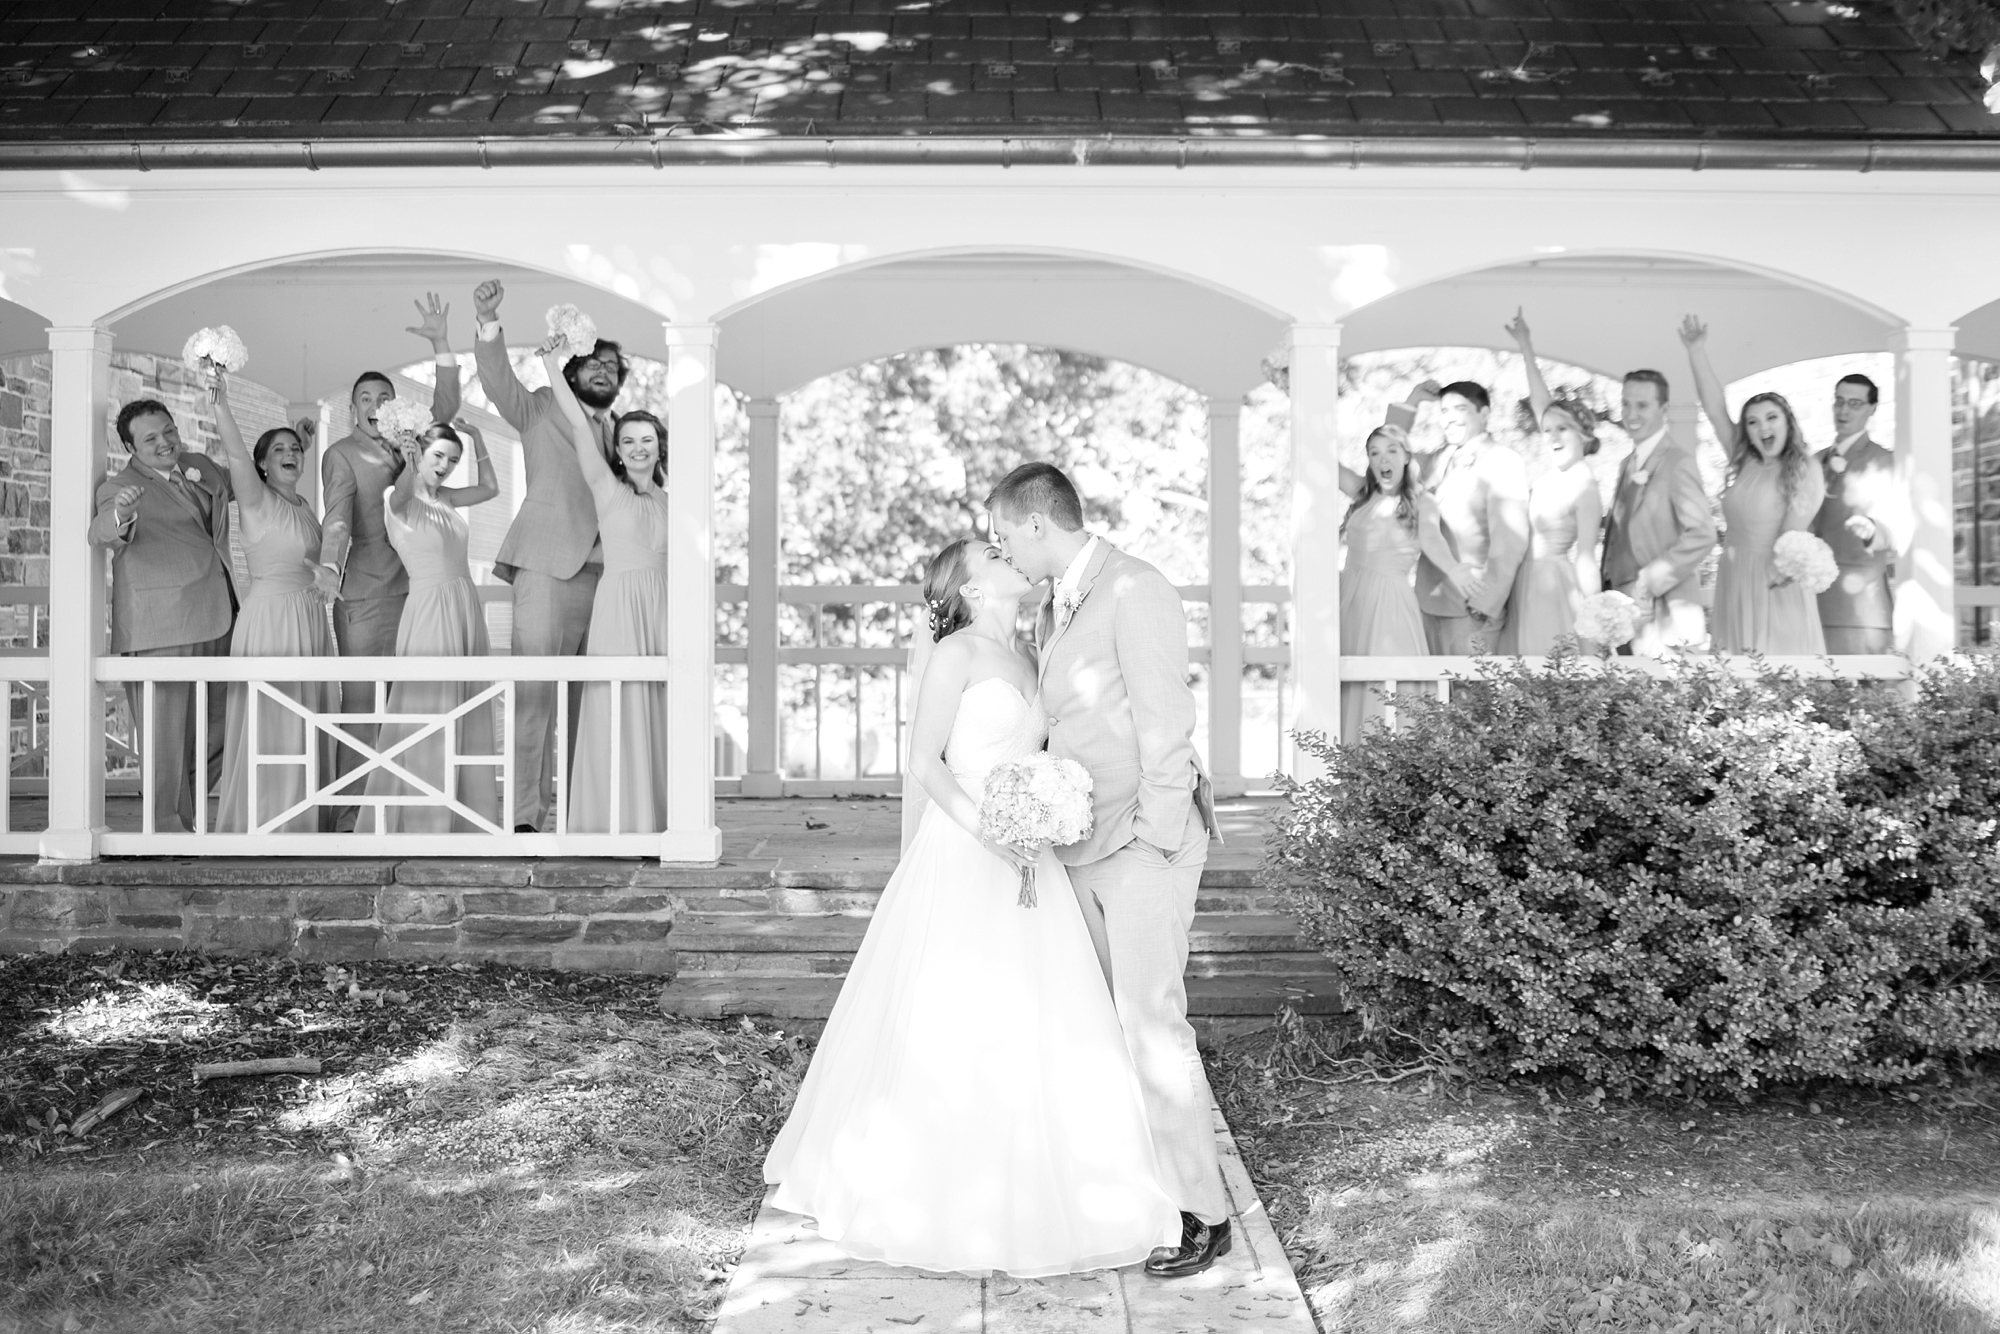 Mroz 2-Bridal Party-539_anna grace photography top of the bay maryland wedding photographer photo.jpg